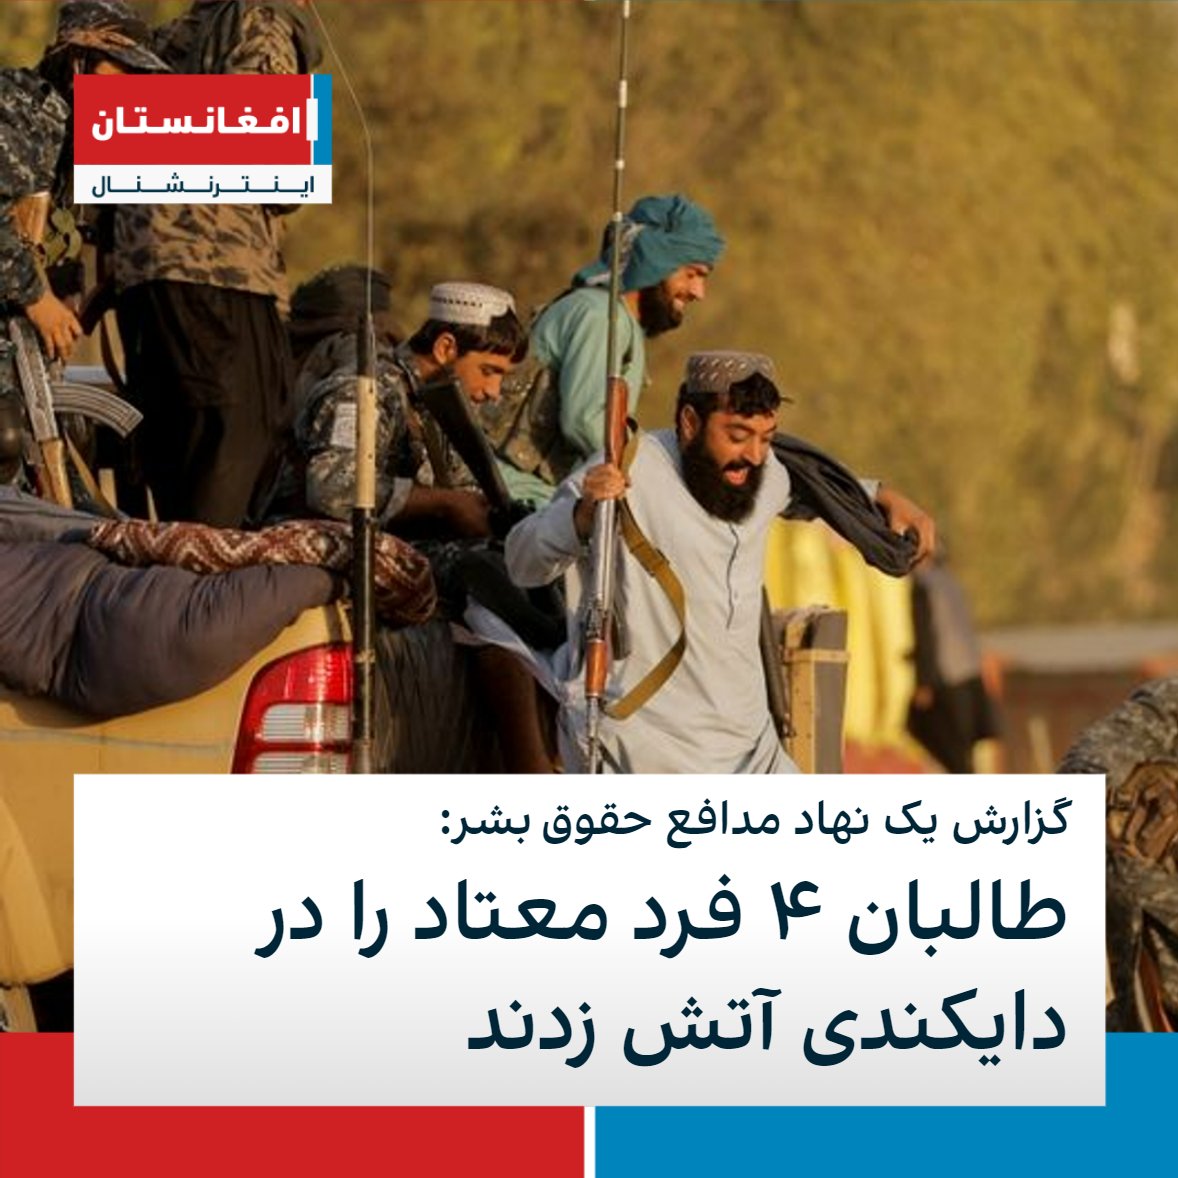 The Taliban are committing crimes against humanity in Daikundi. Recently, 13 Hazara people were shot by the Taliban. It is reported that they are looking for female police officers. And the crimes continue
#UNhumanrights
#Amnestyinternational
#Protectdefenders
#Frontlinedefenders